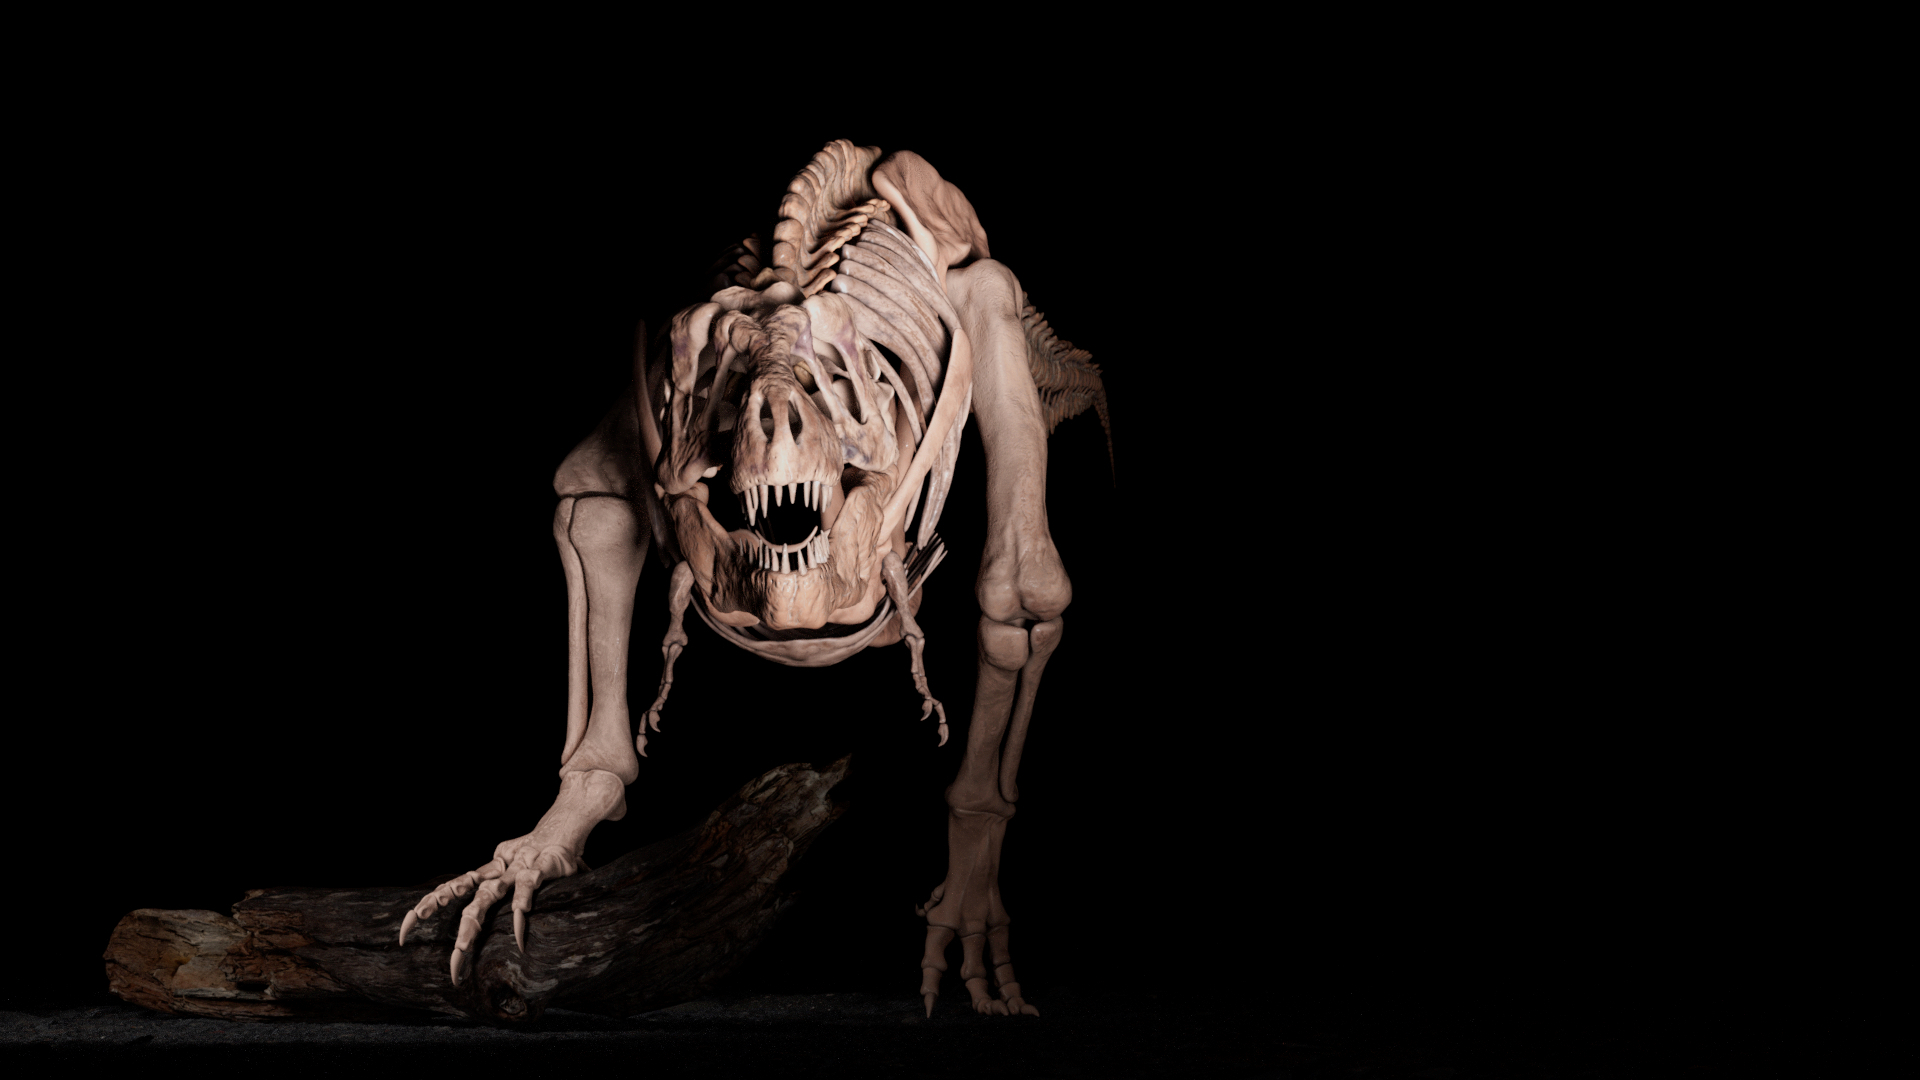 Tyrannosaurus rex skeleton, front view with a wooden trunk